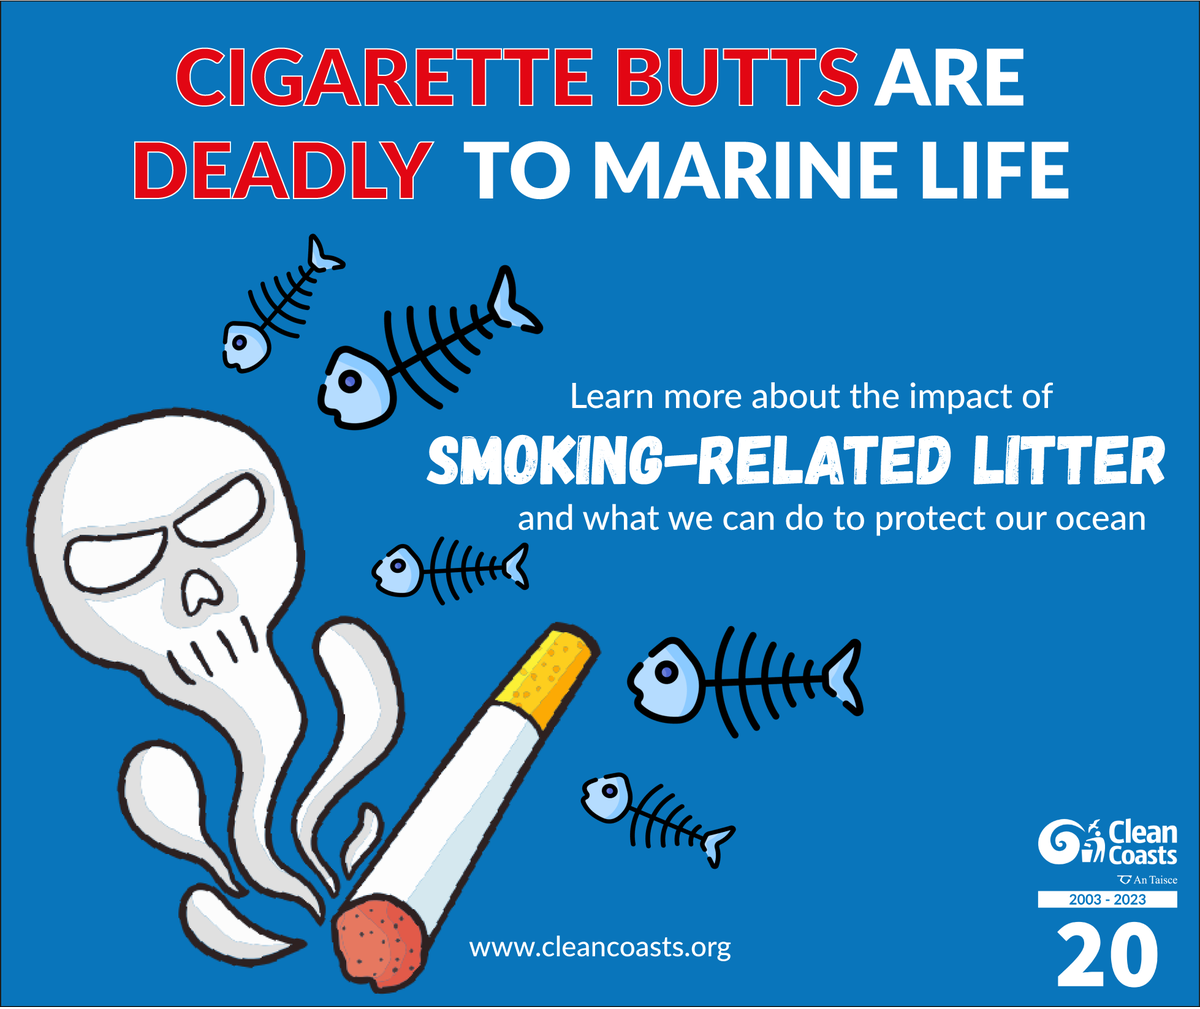 Since 2019 during the Big Beach Clean 22.7K cigarettes were removed from our coast. 1 butt can contaminate up to 1000 L of water. By removing 22.7K cigarette butts volunteers have effectively conserved 22,7m litres of water = 9 Olympic sized swimming pools!
#BinYourButt!